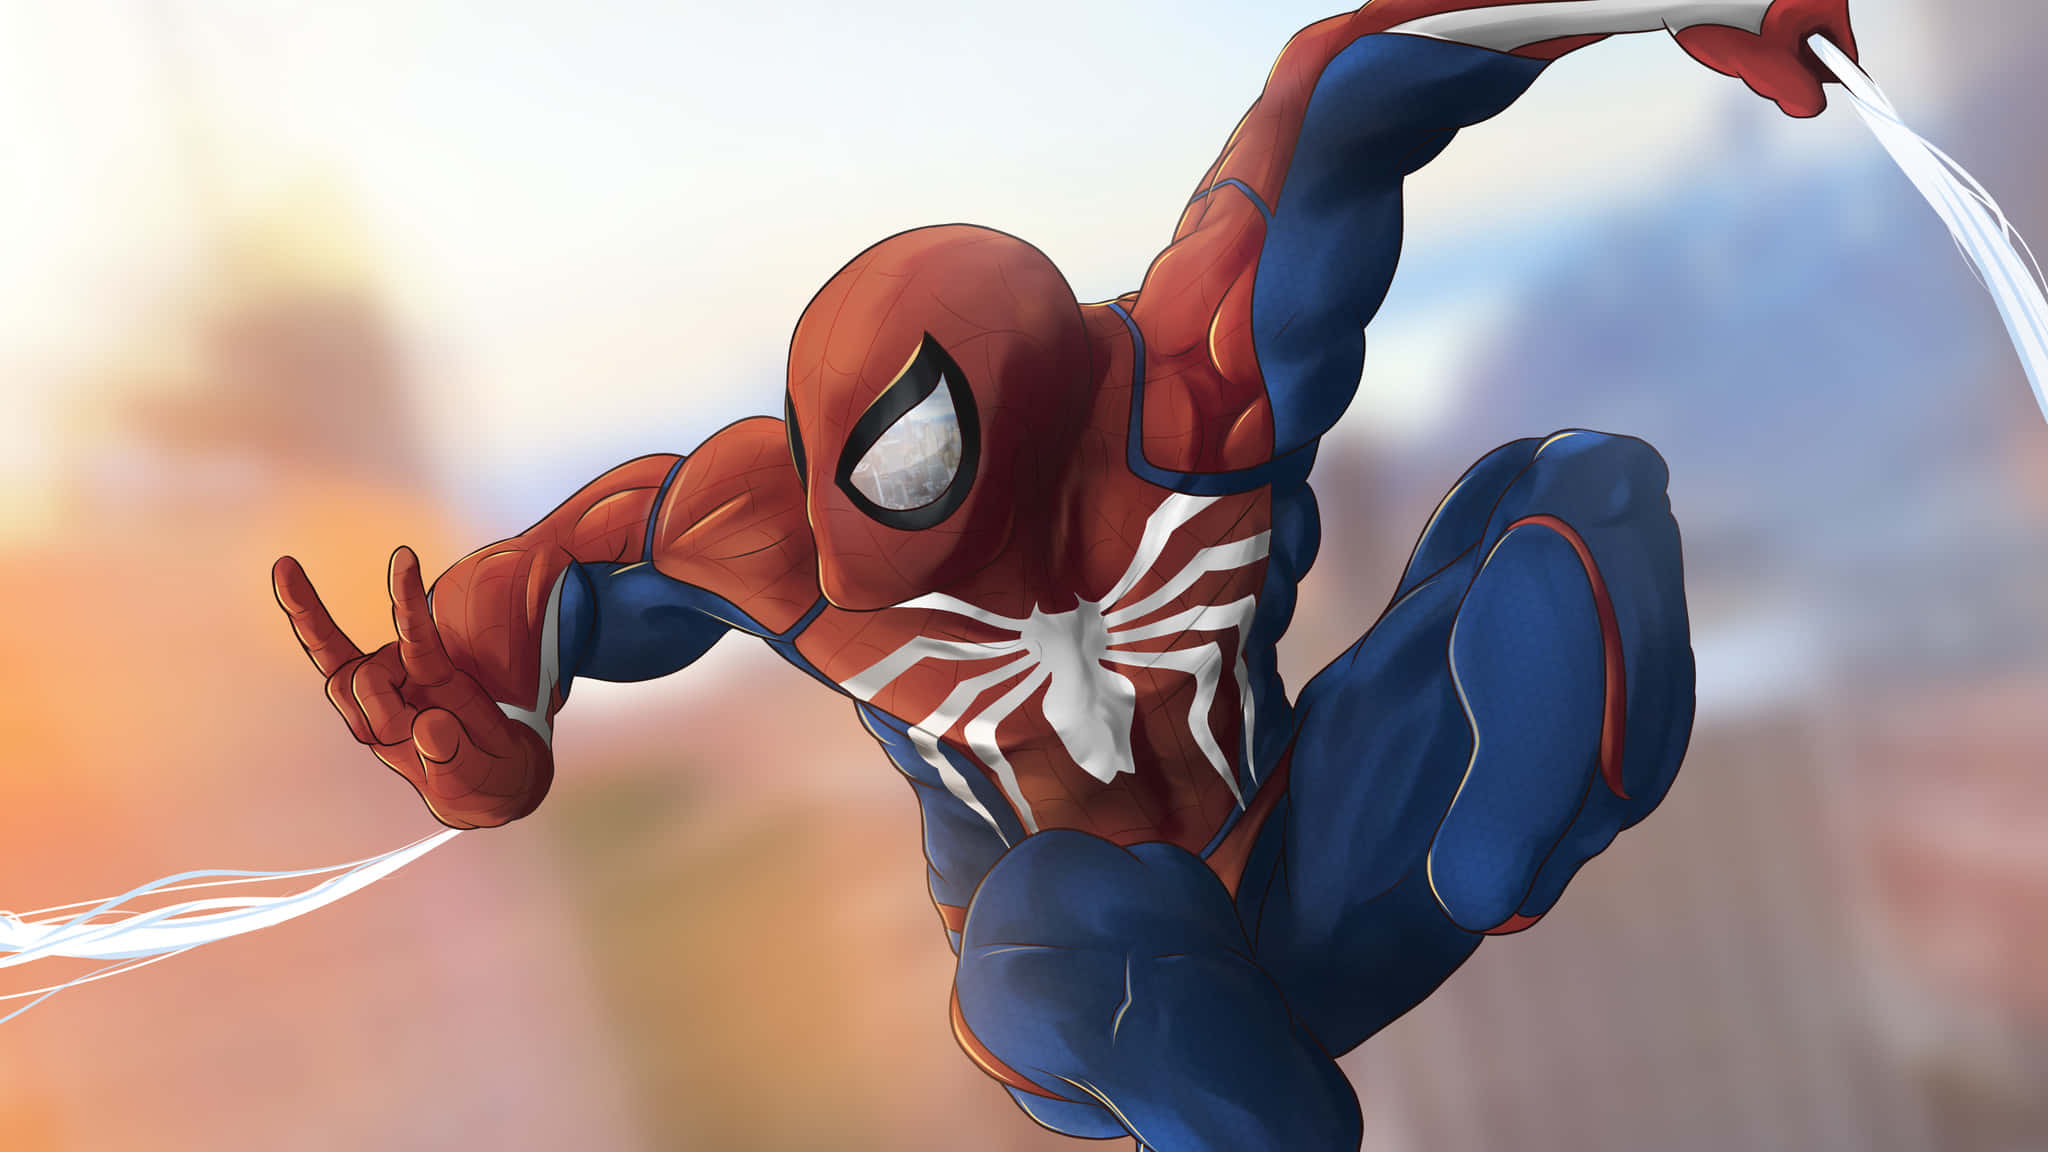 Ultimate Spider-man Swinging Through The City Wallpaper